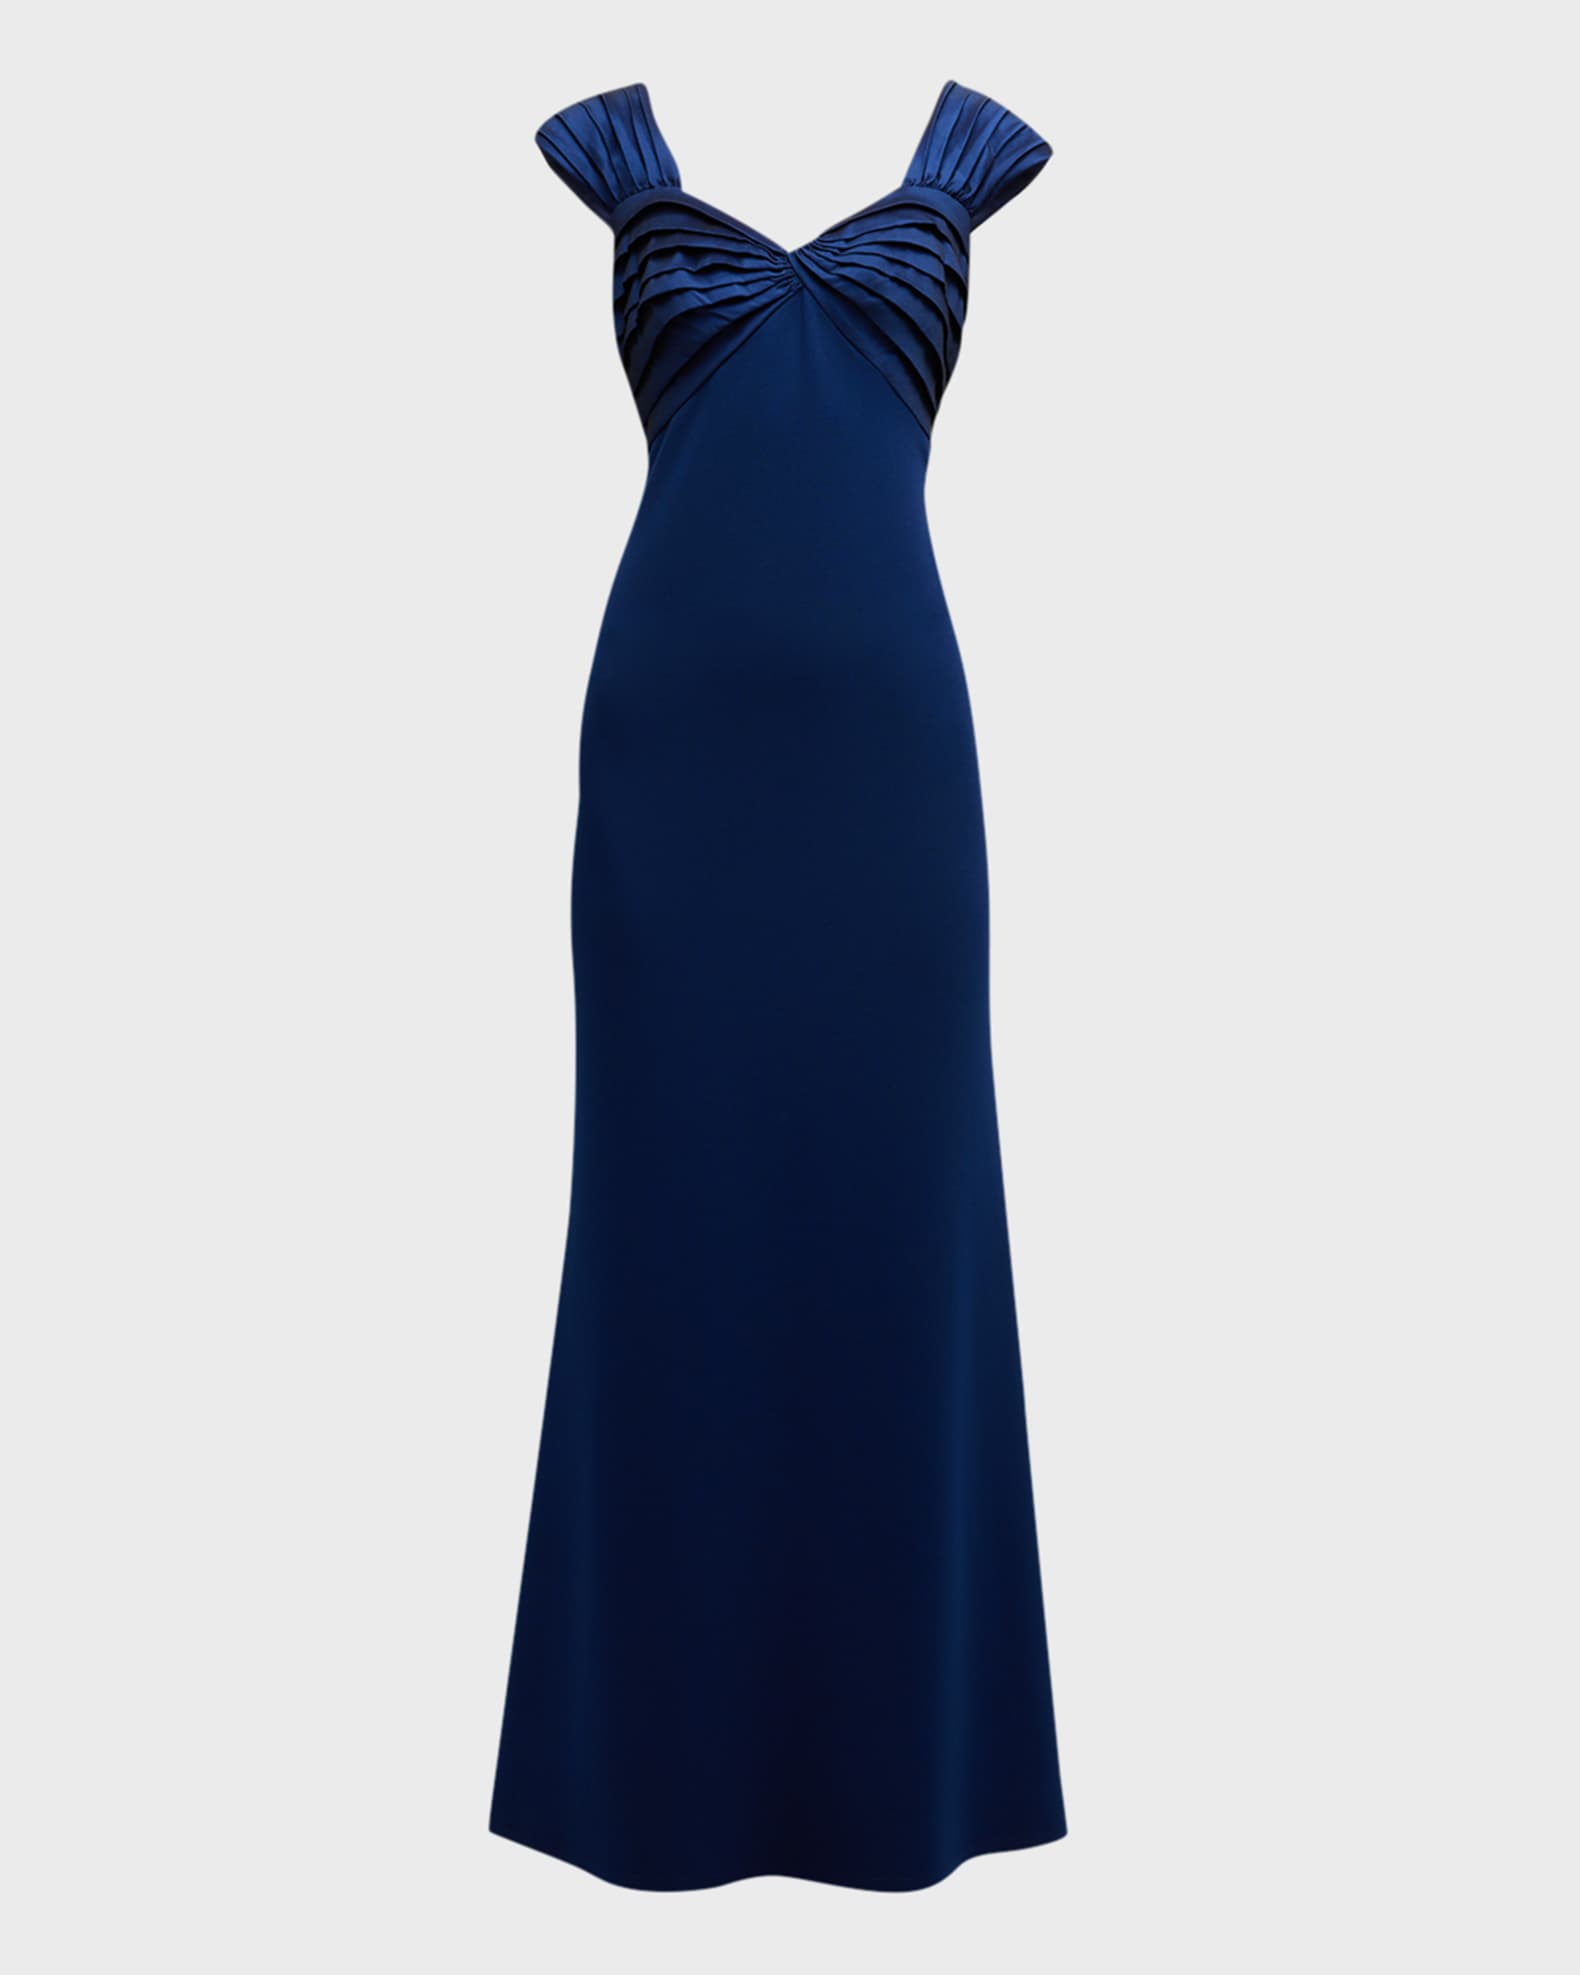 Sleeveless Draped A-Line Gown